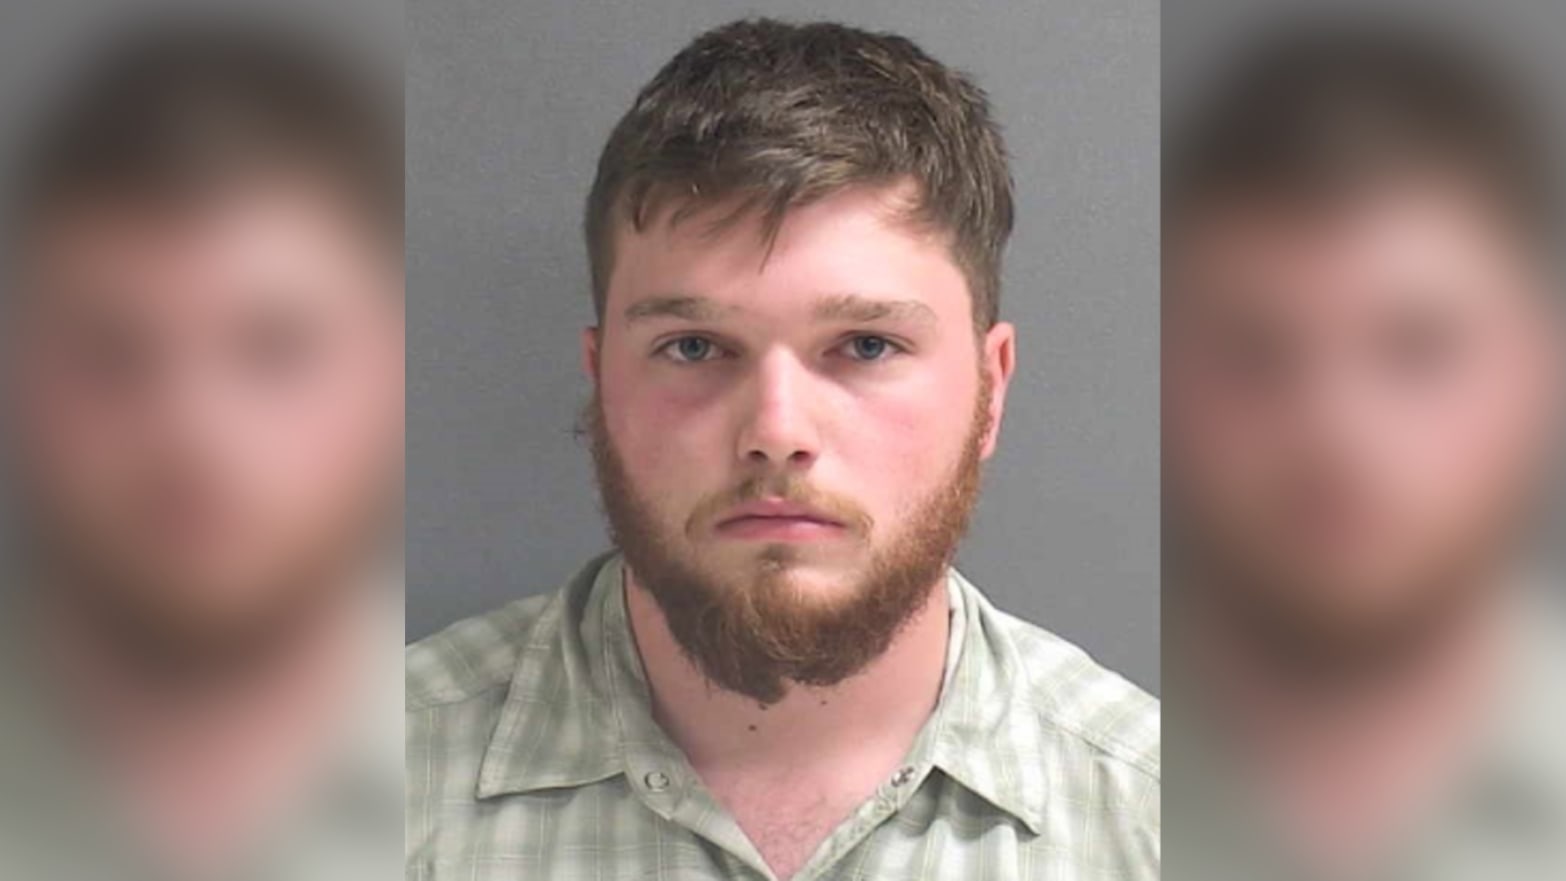 Florida College Student Arrested for Planning Columbine-Style Attack on Campus With Rifle He Bought on Facebook